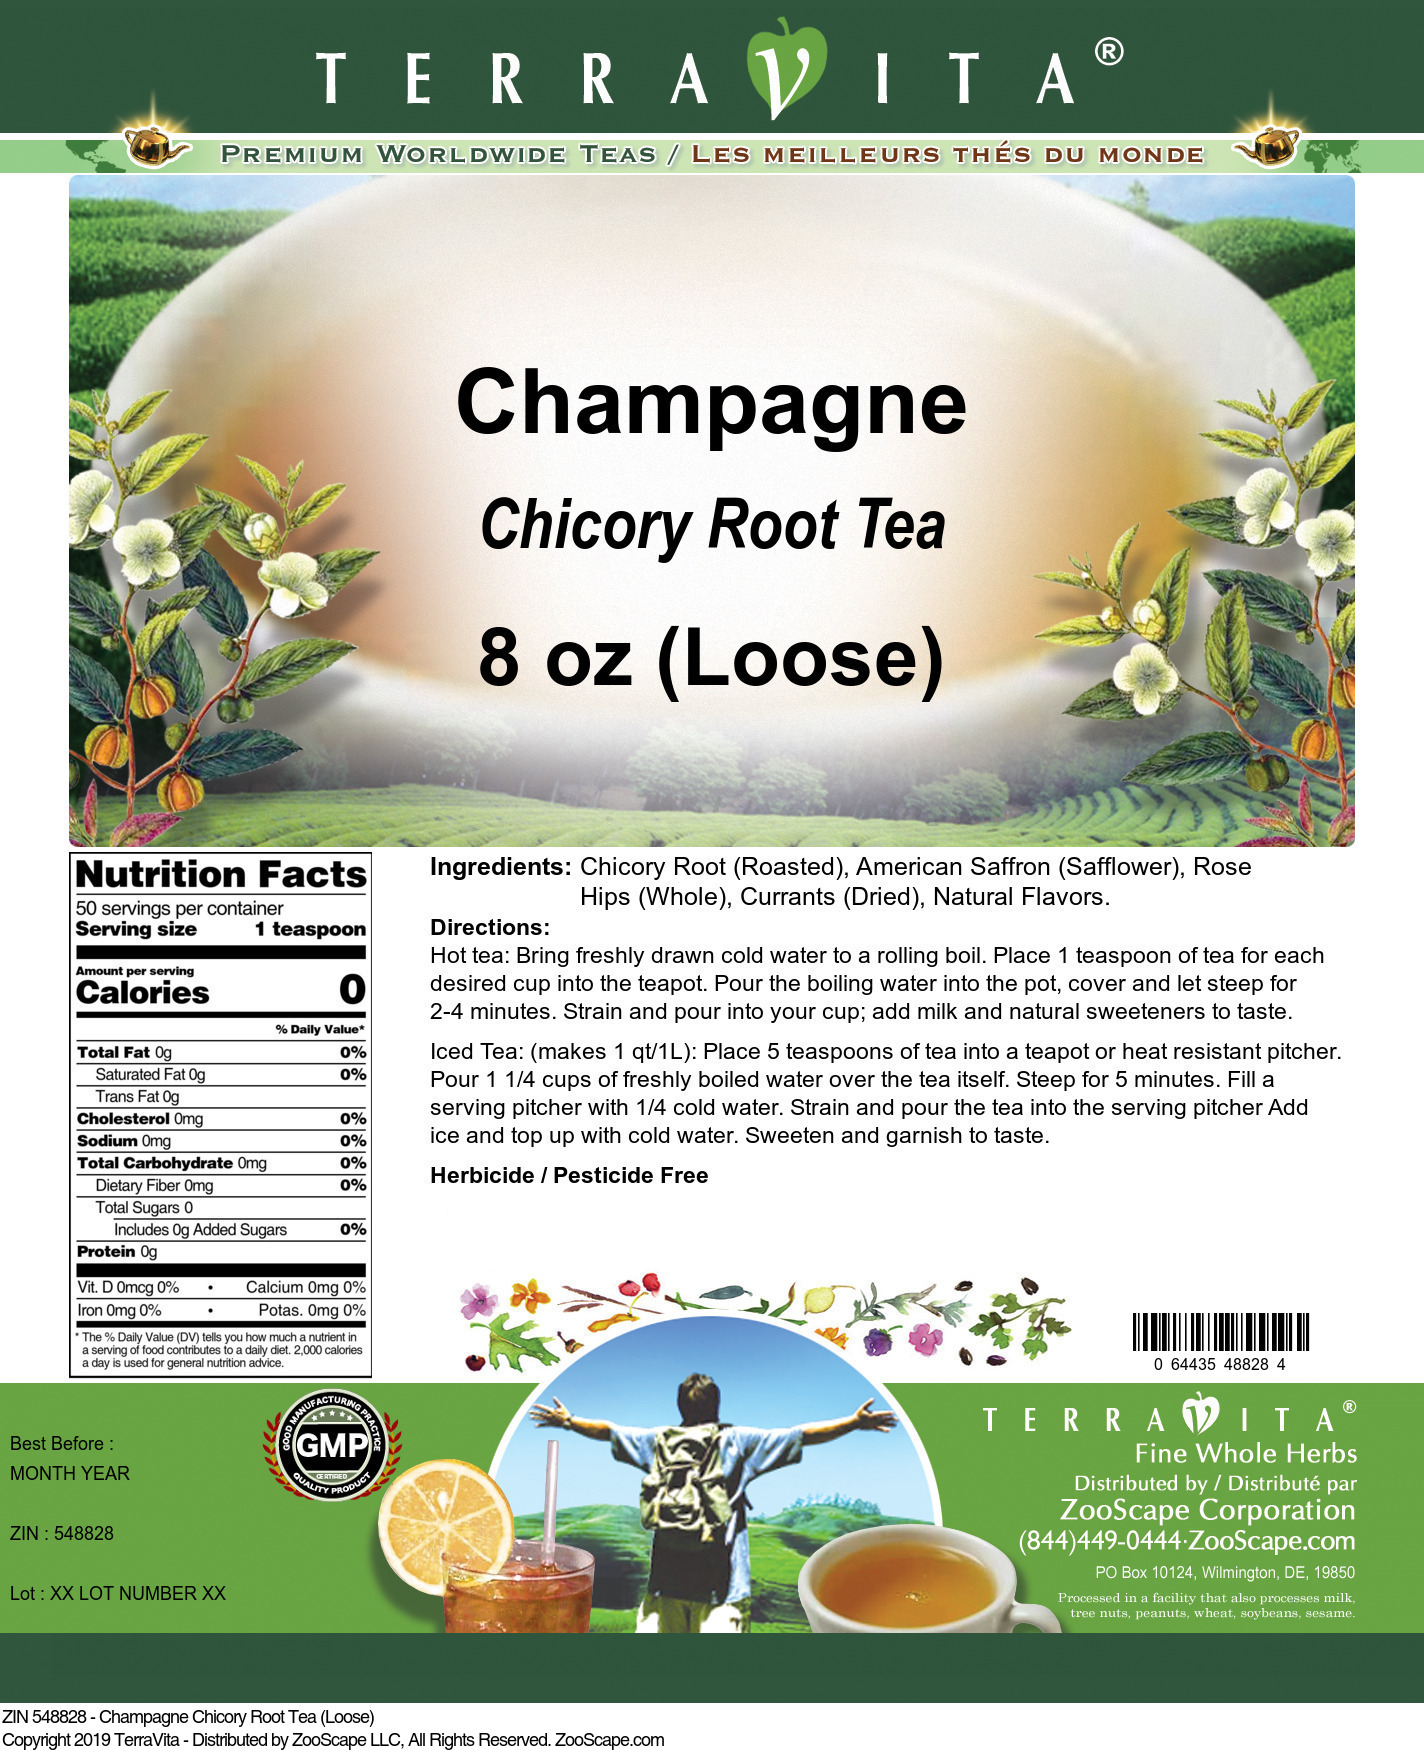 Champagne Chicory Root Tea (Loose) - Label